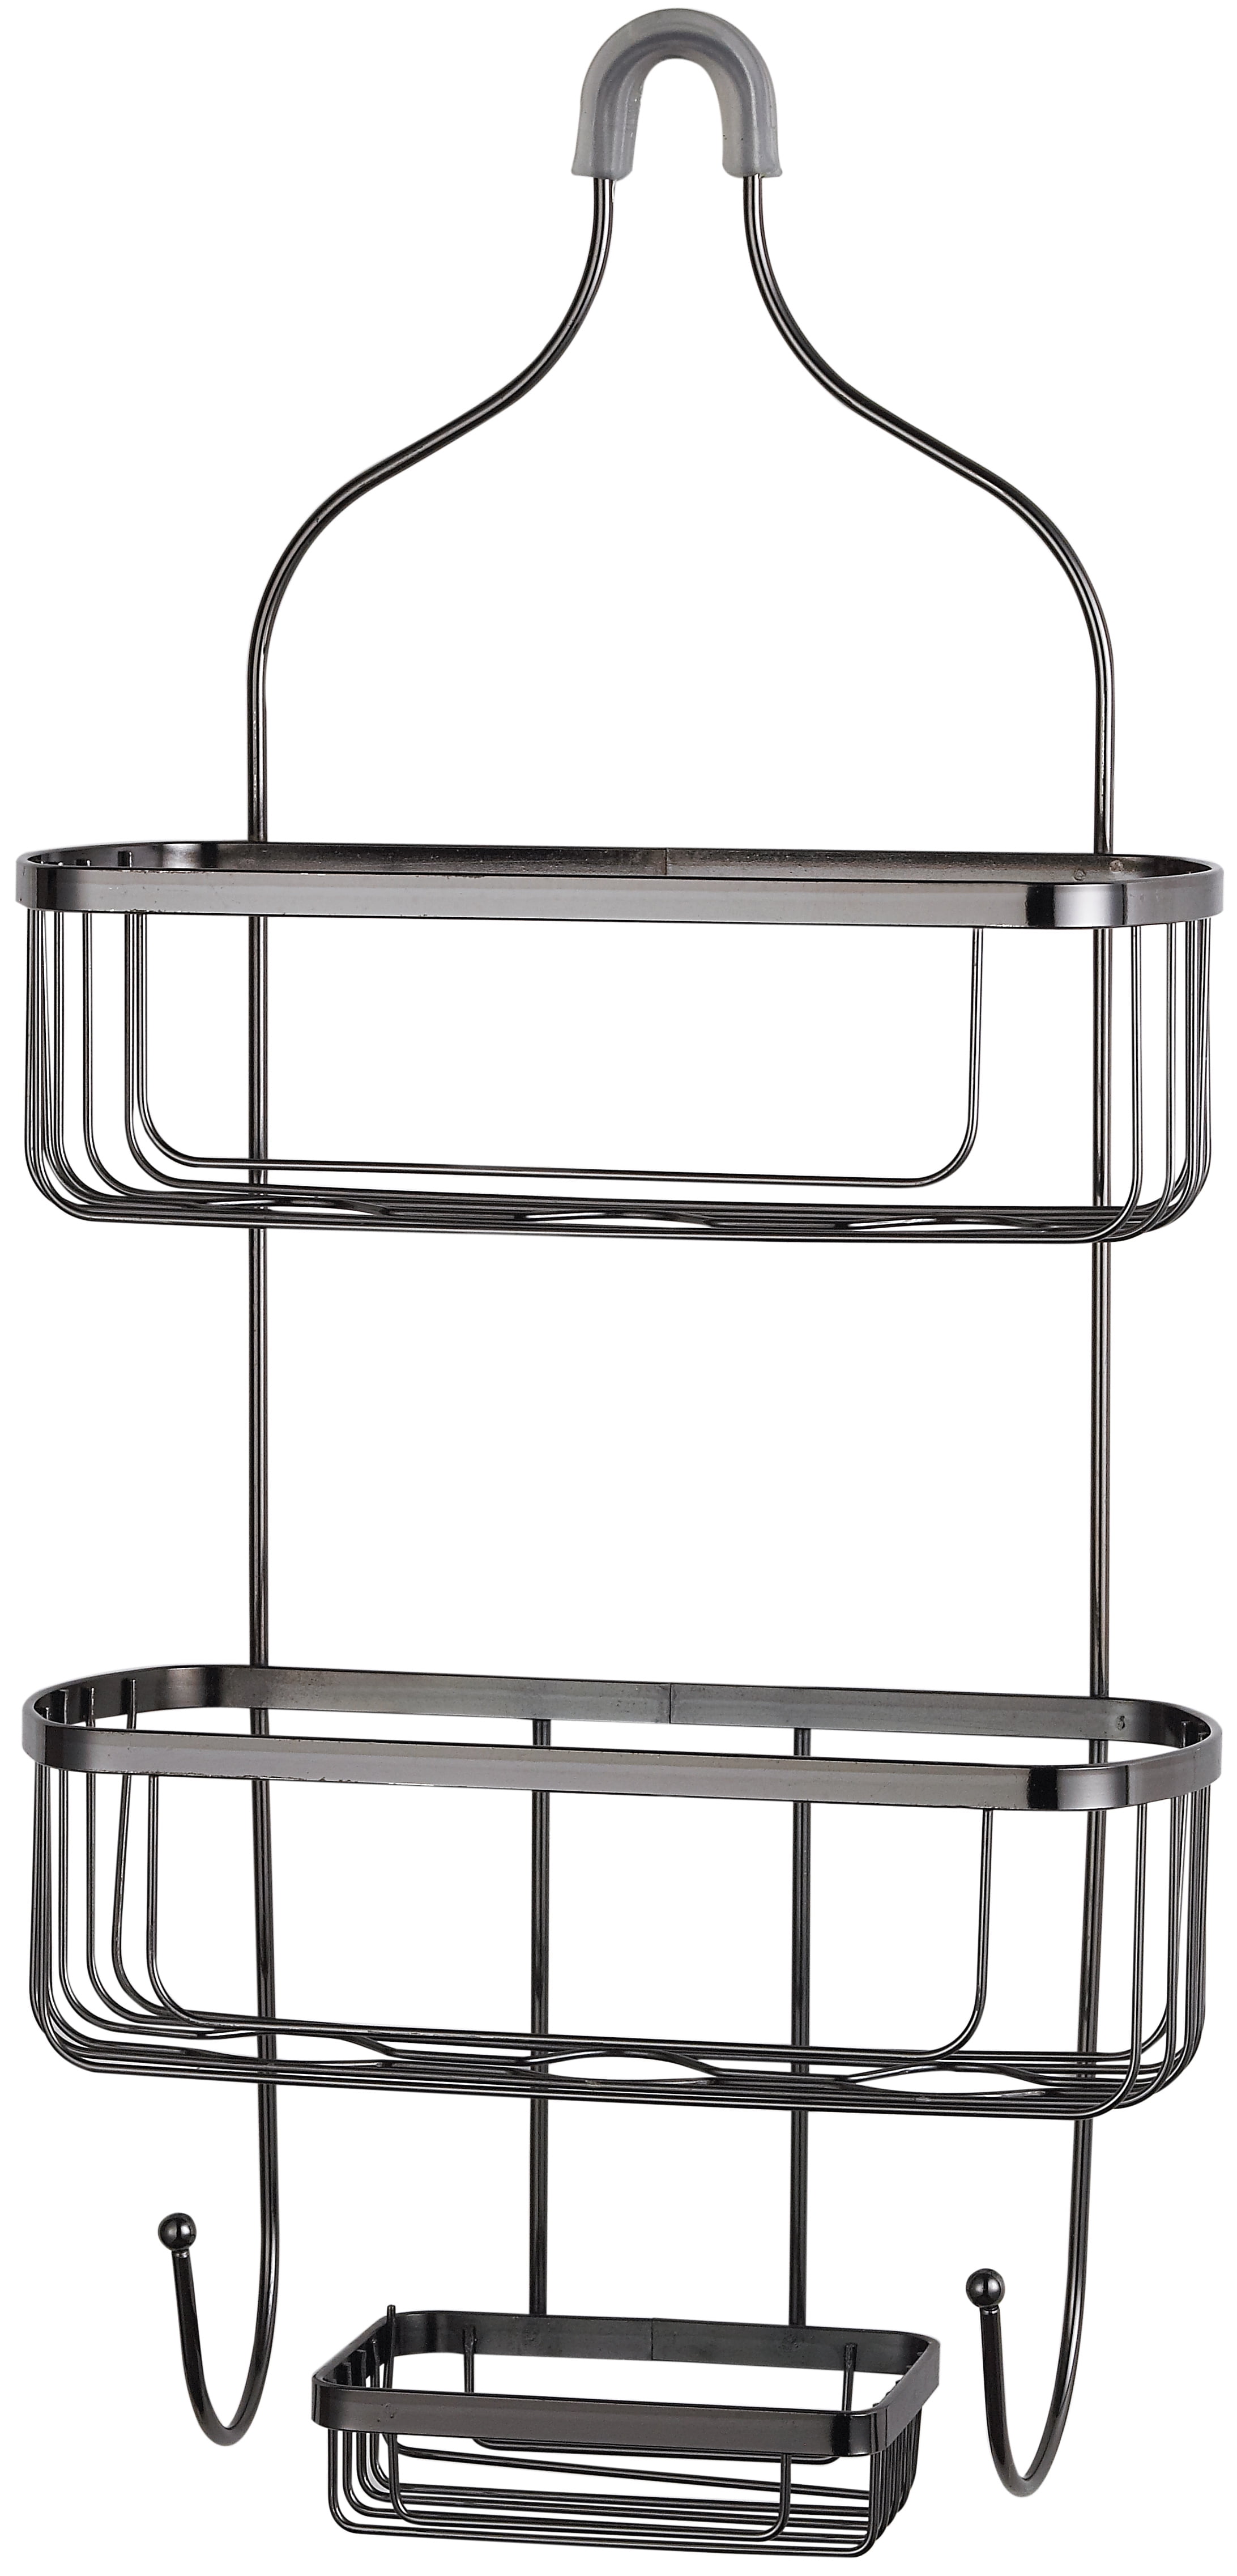 Home Basics Wave 2 Tier Aluminum Suction Shower Caddy with